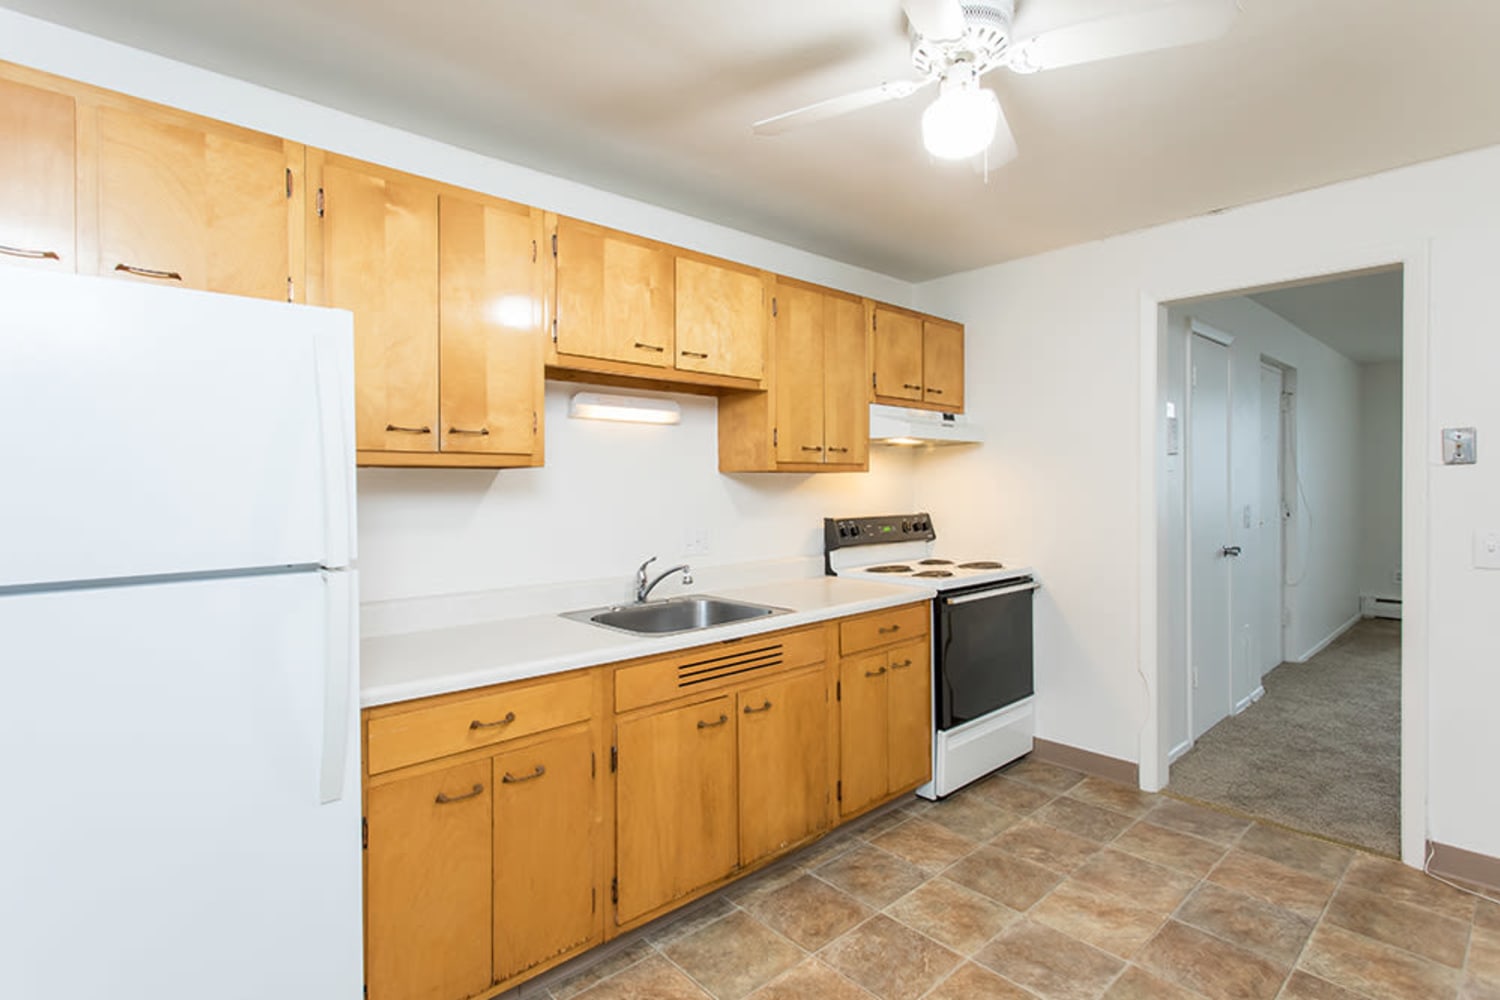 Fully equipped kitchen at Pittsford Garden Apartments in Pittsford, New York